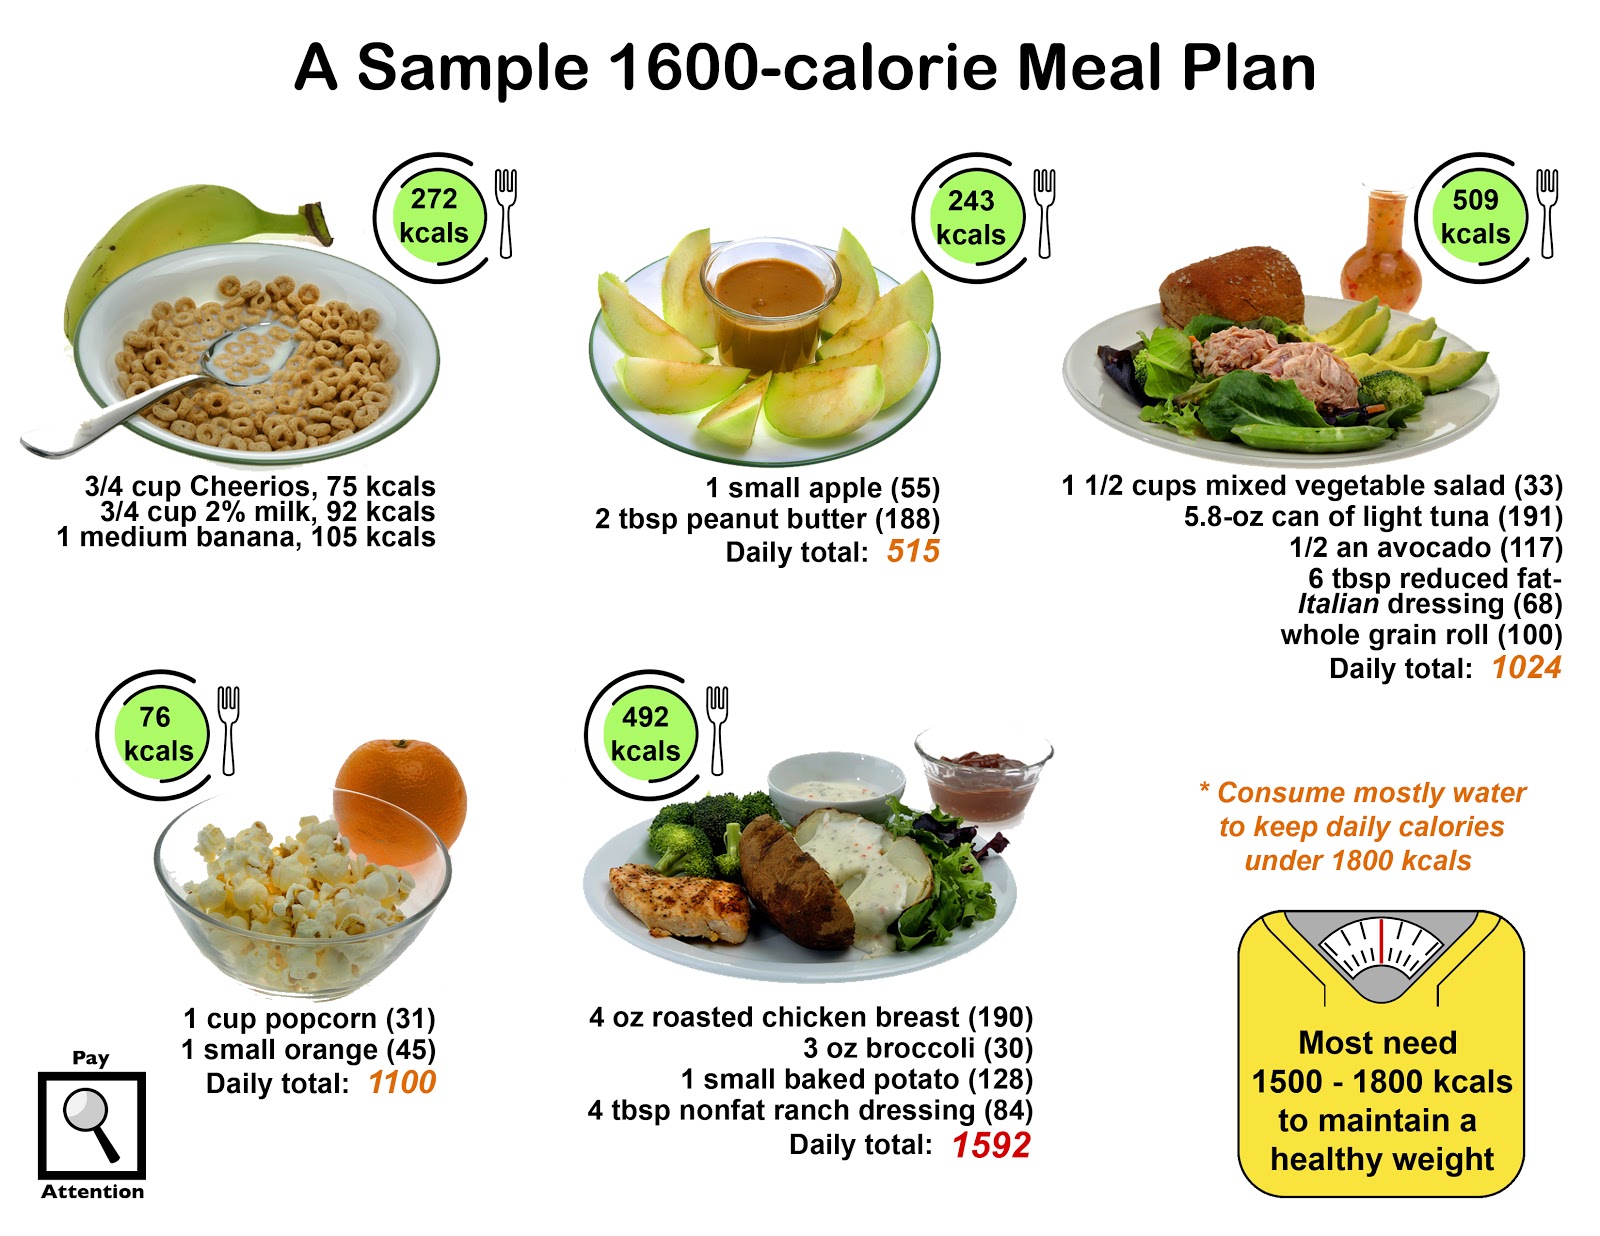 8 Habits to Health: Sample 1600-kcal Meal Plan (Habit 